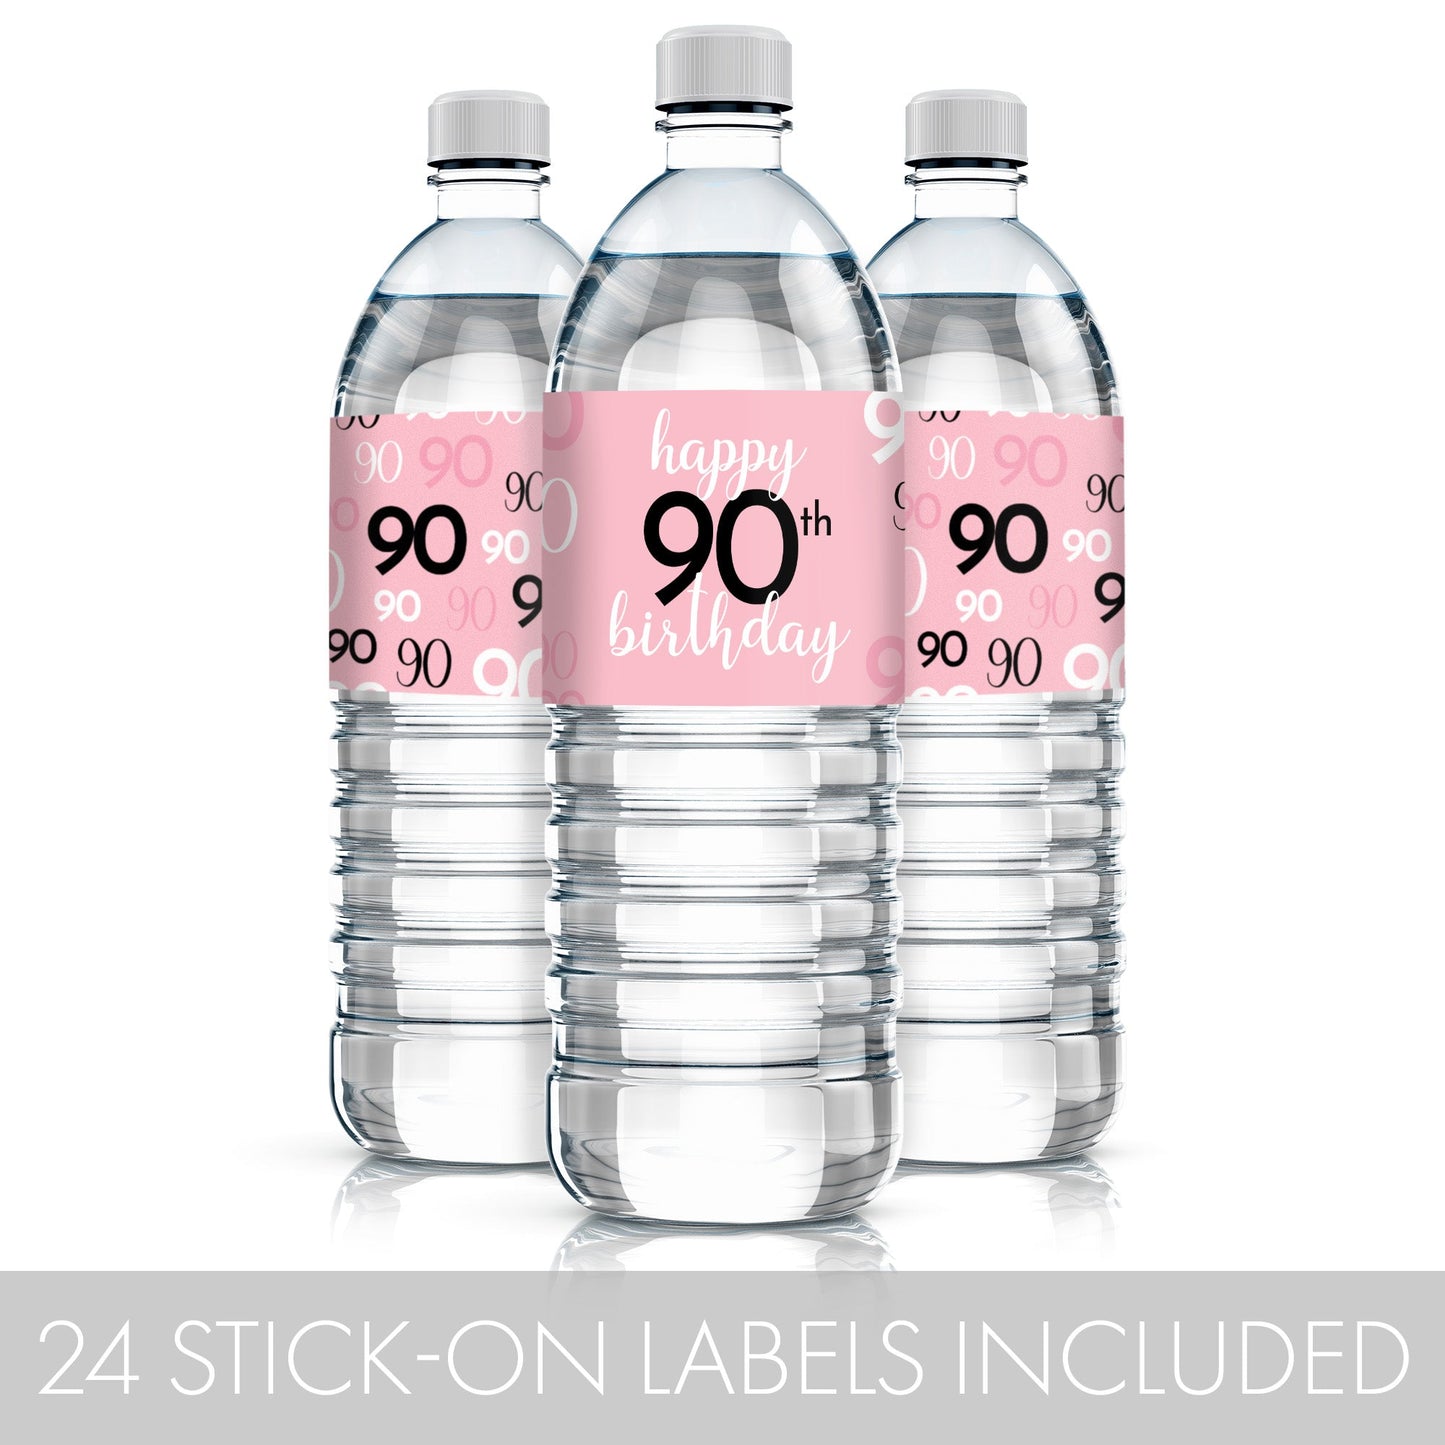 Eye-catching 90th birthday water bottle labels in pink and black with easy peel-and-stick application